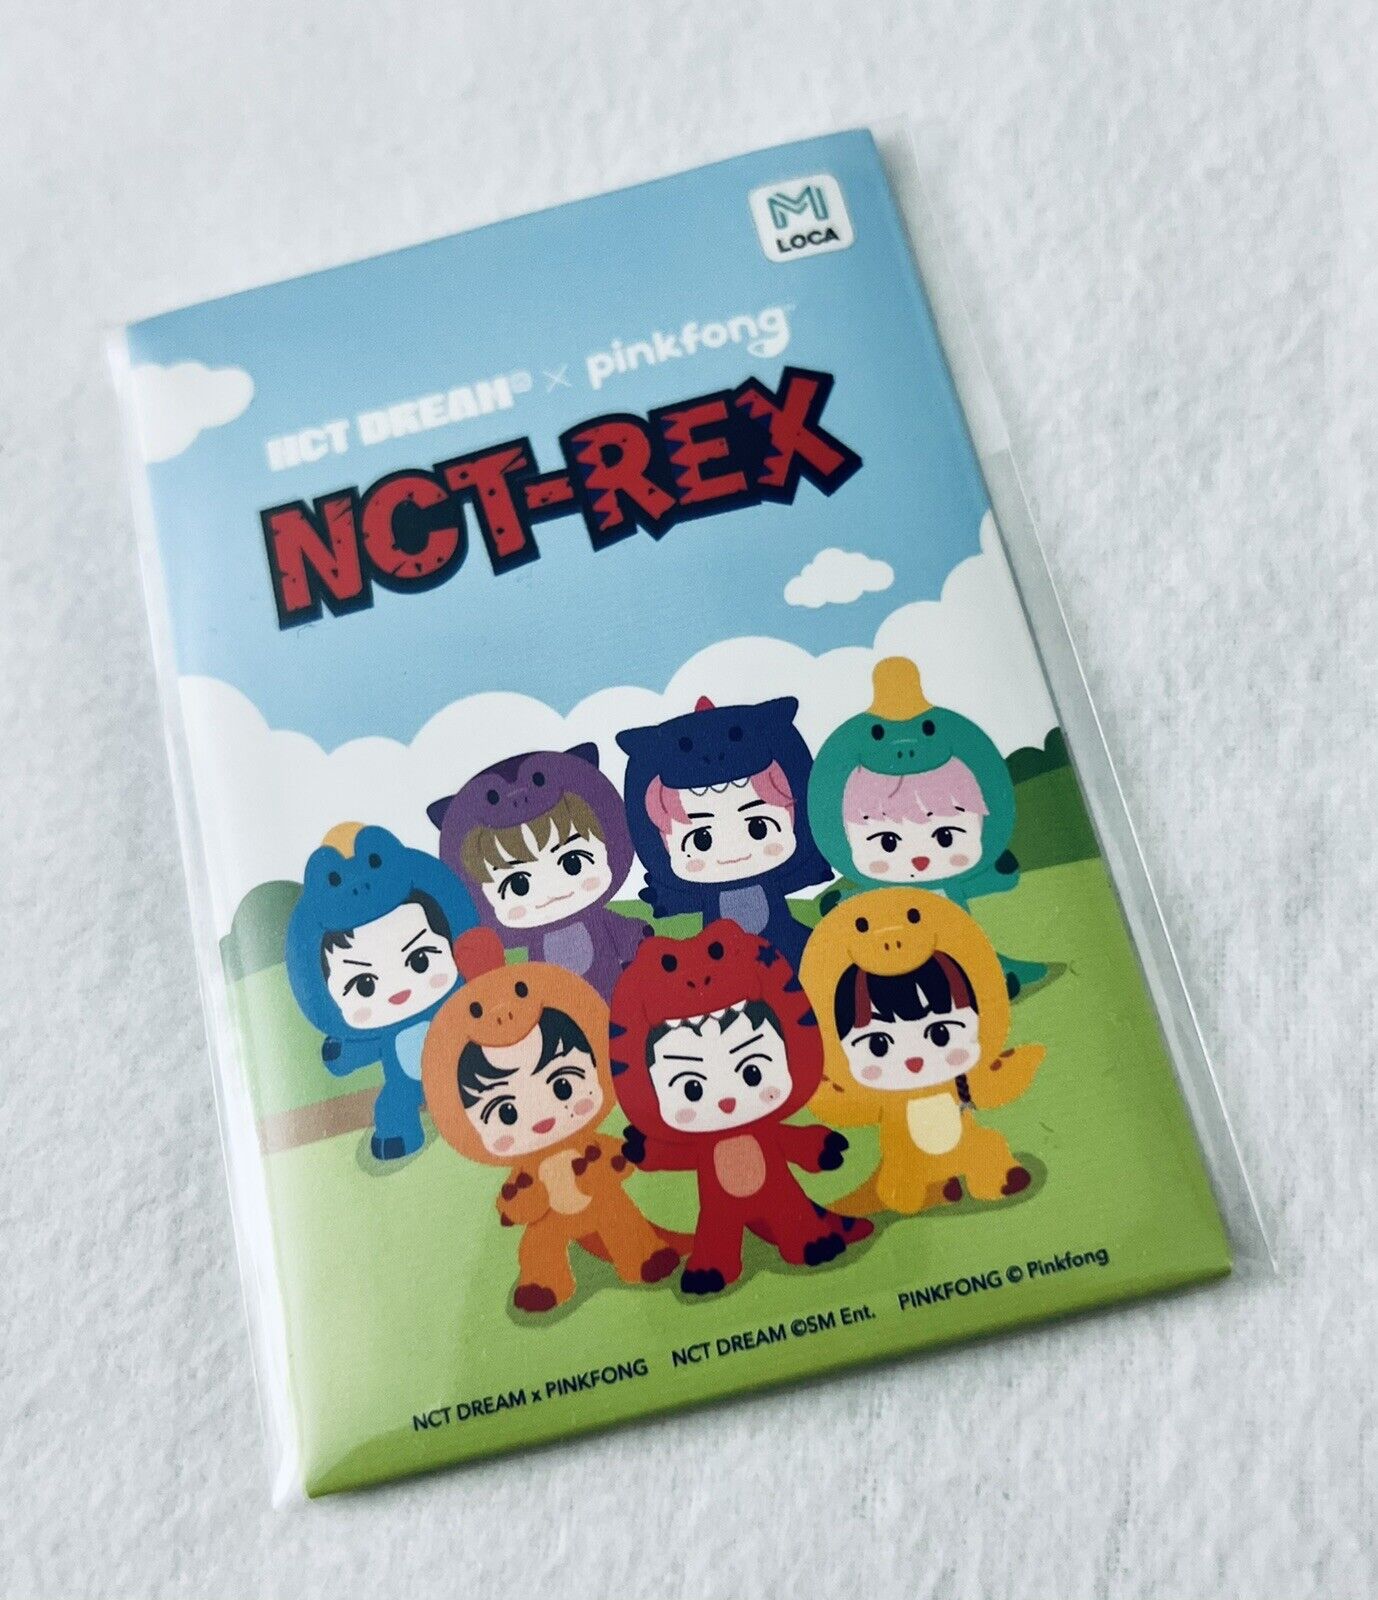 [MARK] NCT DREAM X PINKFONG NCT-REX OFFICIAL MD LOCA MOBILITY CARD + PHOTOCARD Без бренда - фотография #6